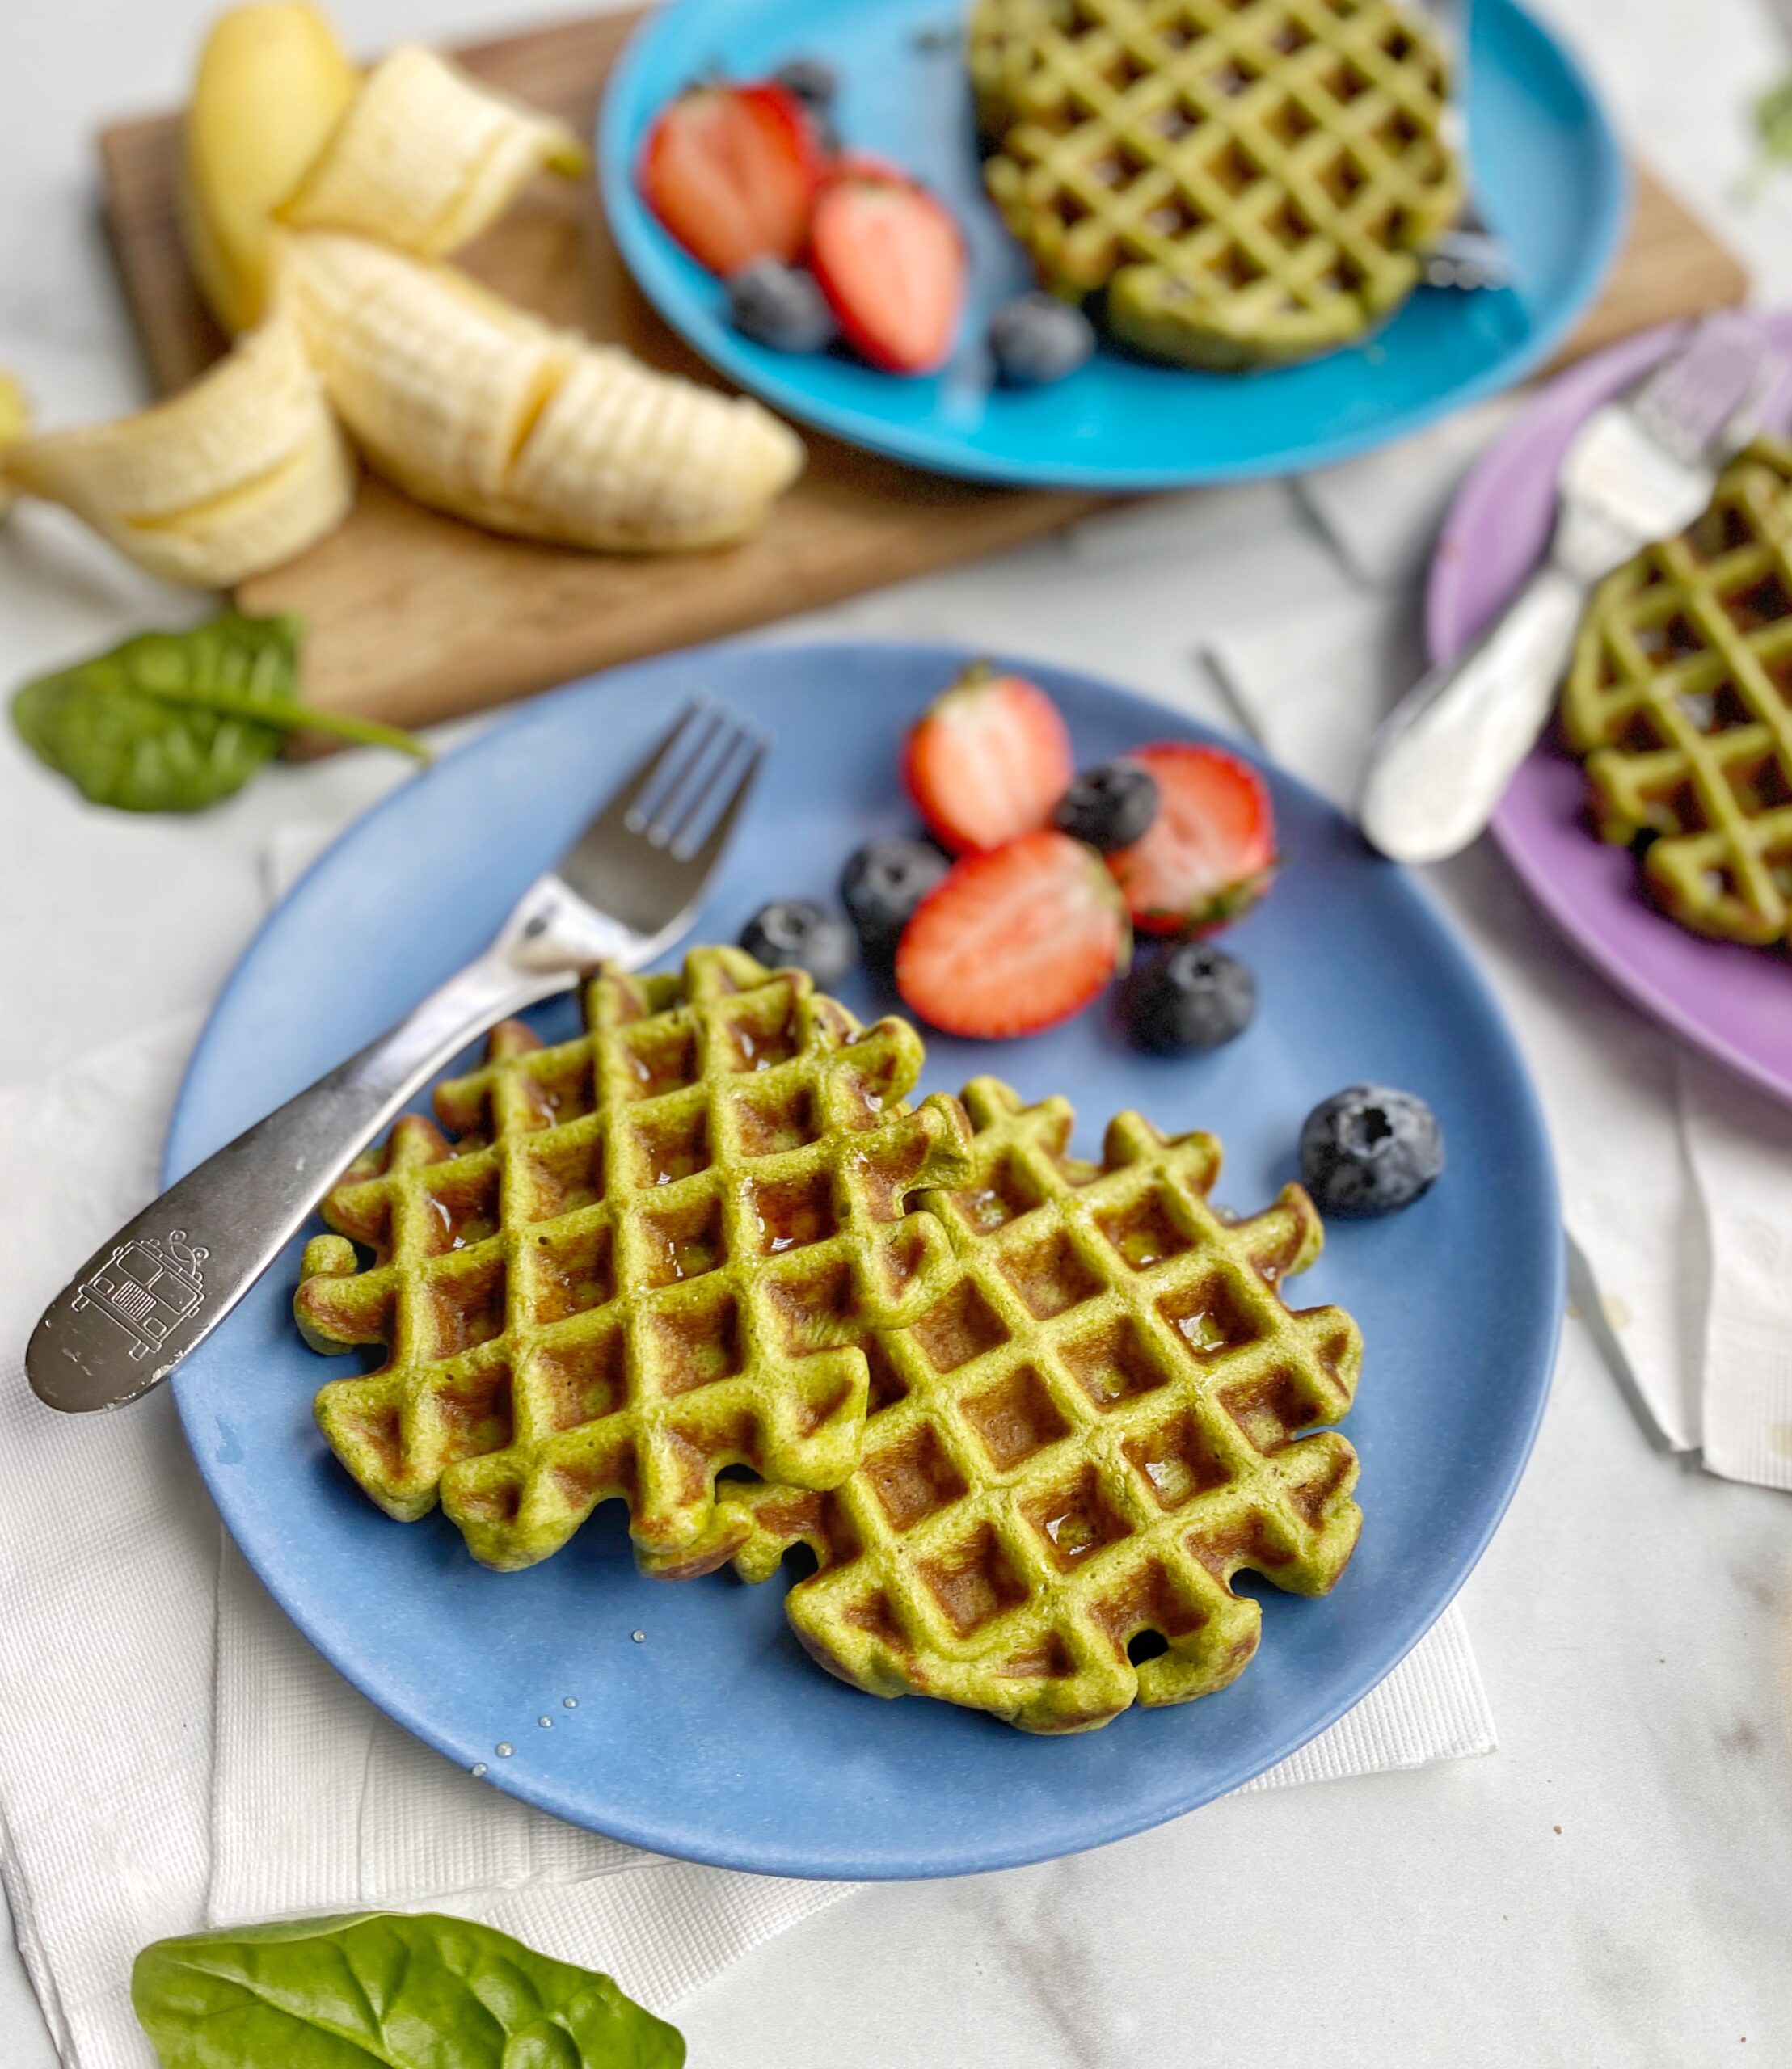 3 plates with Spinach Banana Waffles with strawberries and blueberries also on the plate. A sliced banana still half in the peel on a cutting board surrounding the plates on a counter. Counter has pieces of spinach strewn about the counter and a bowl of syrup with a spoon on the counter.